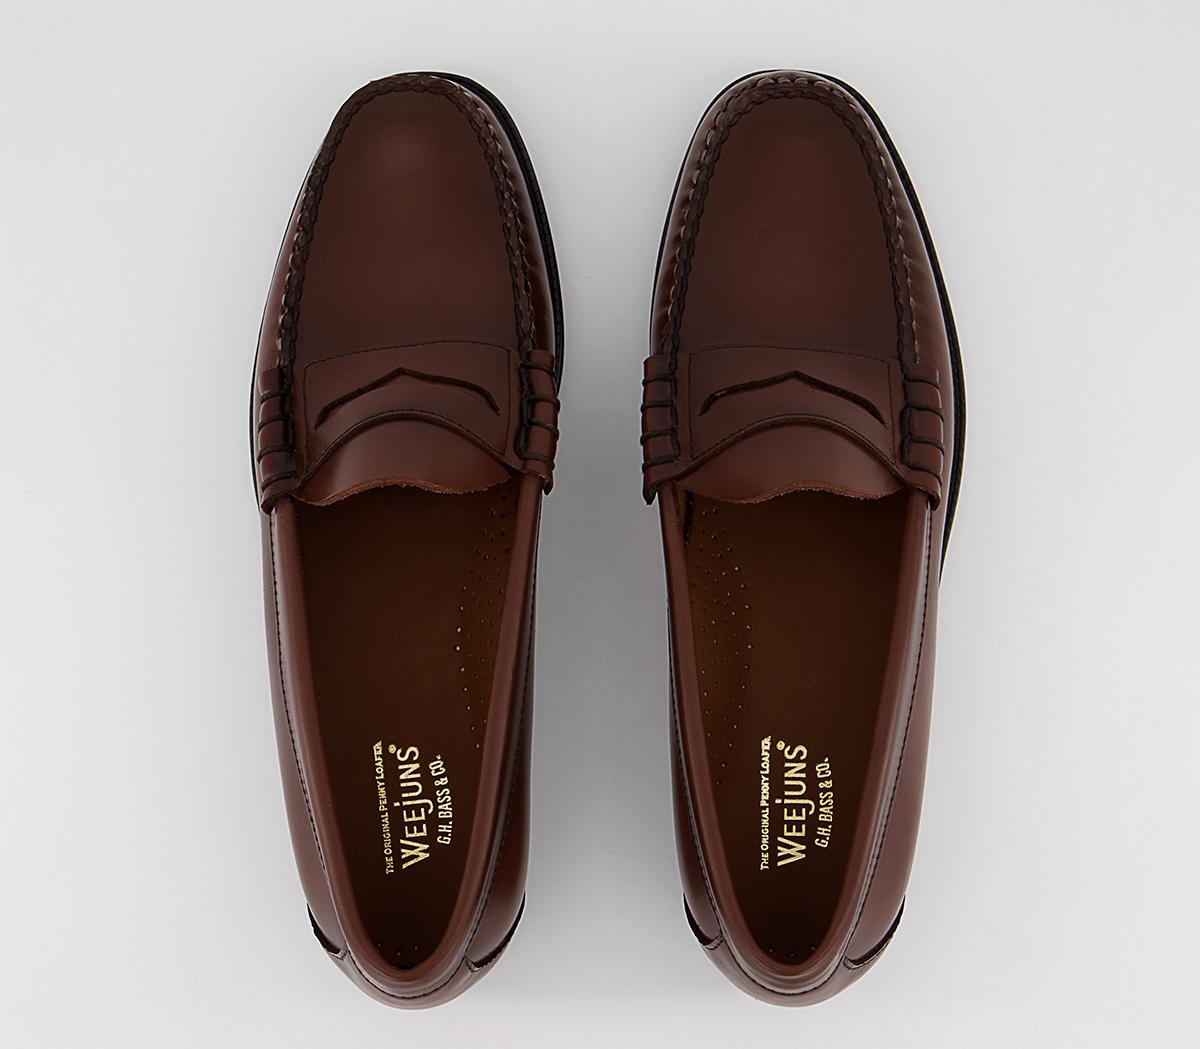 G.H Bass & Co Easy Weejun Penny Loafers Mid Brown - Men’s Smart Shoes